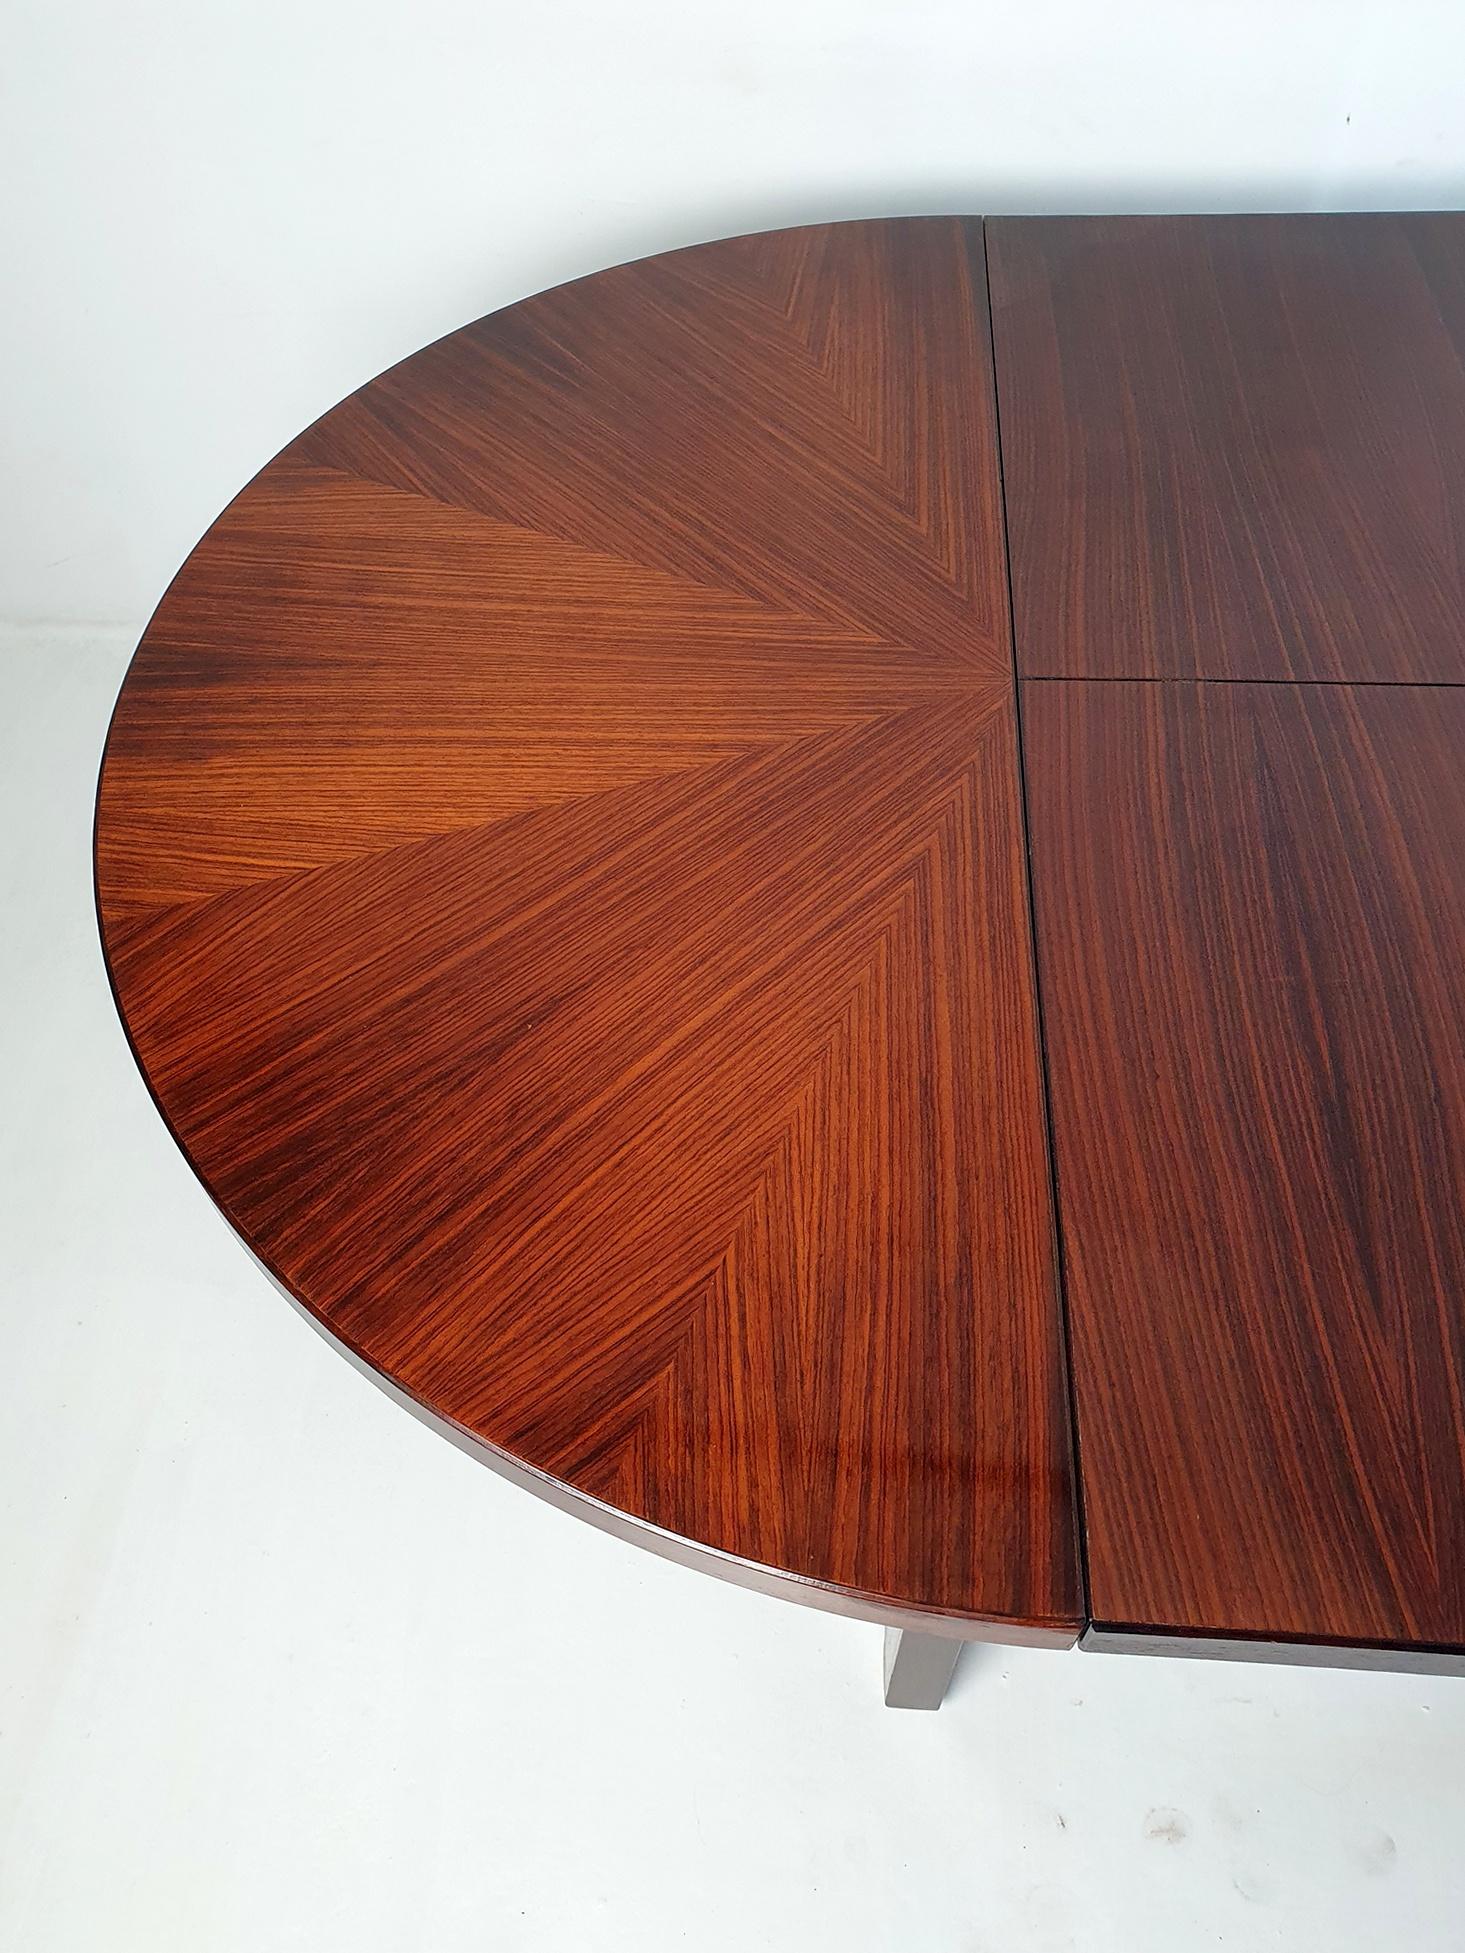 Mid-Century Modern Round Extendable Dining Table by Ico Parisi for Mim Italy In Good Condition For Sale In Albano Laziale, Rome/Lazio